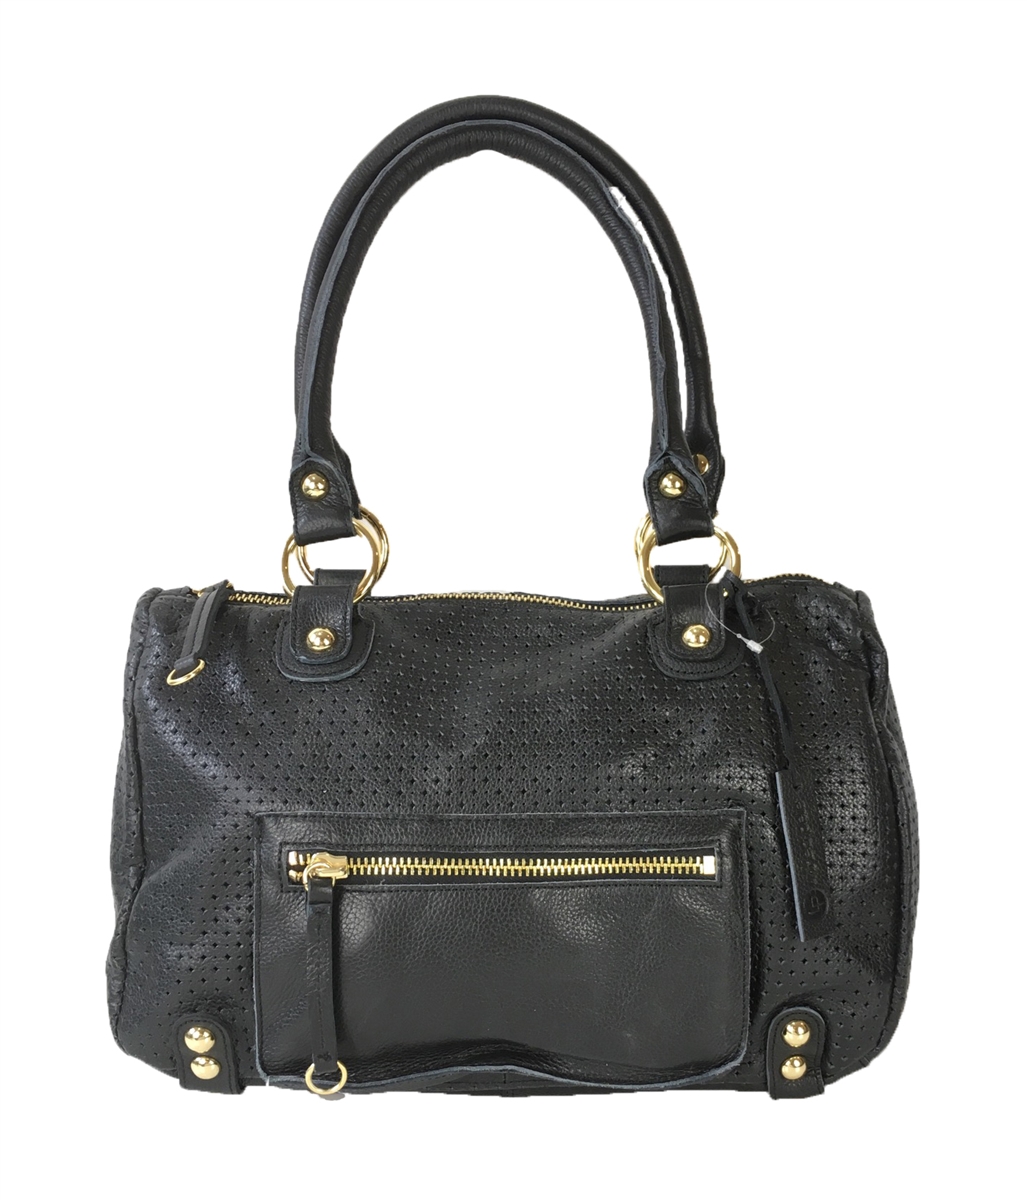 Linea Pelle Dylan Perforated Leather Speedy Satchel Black